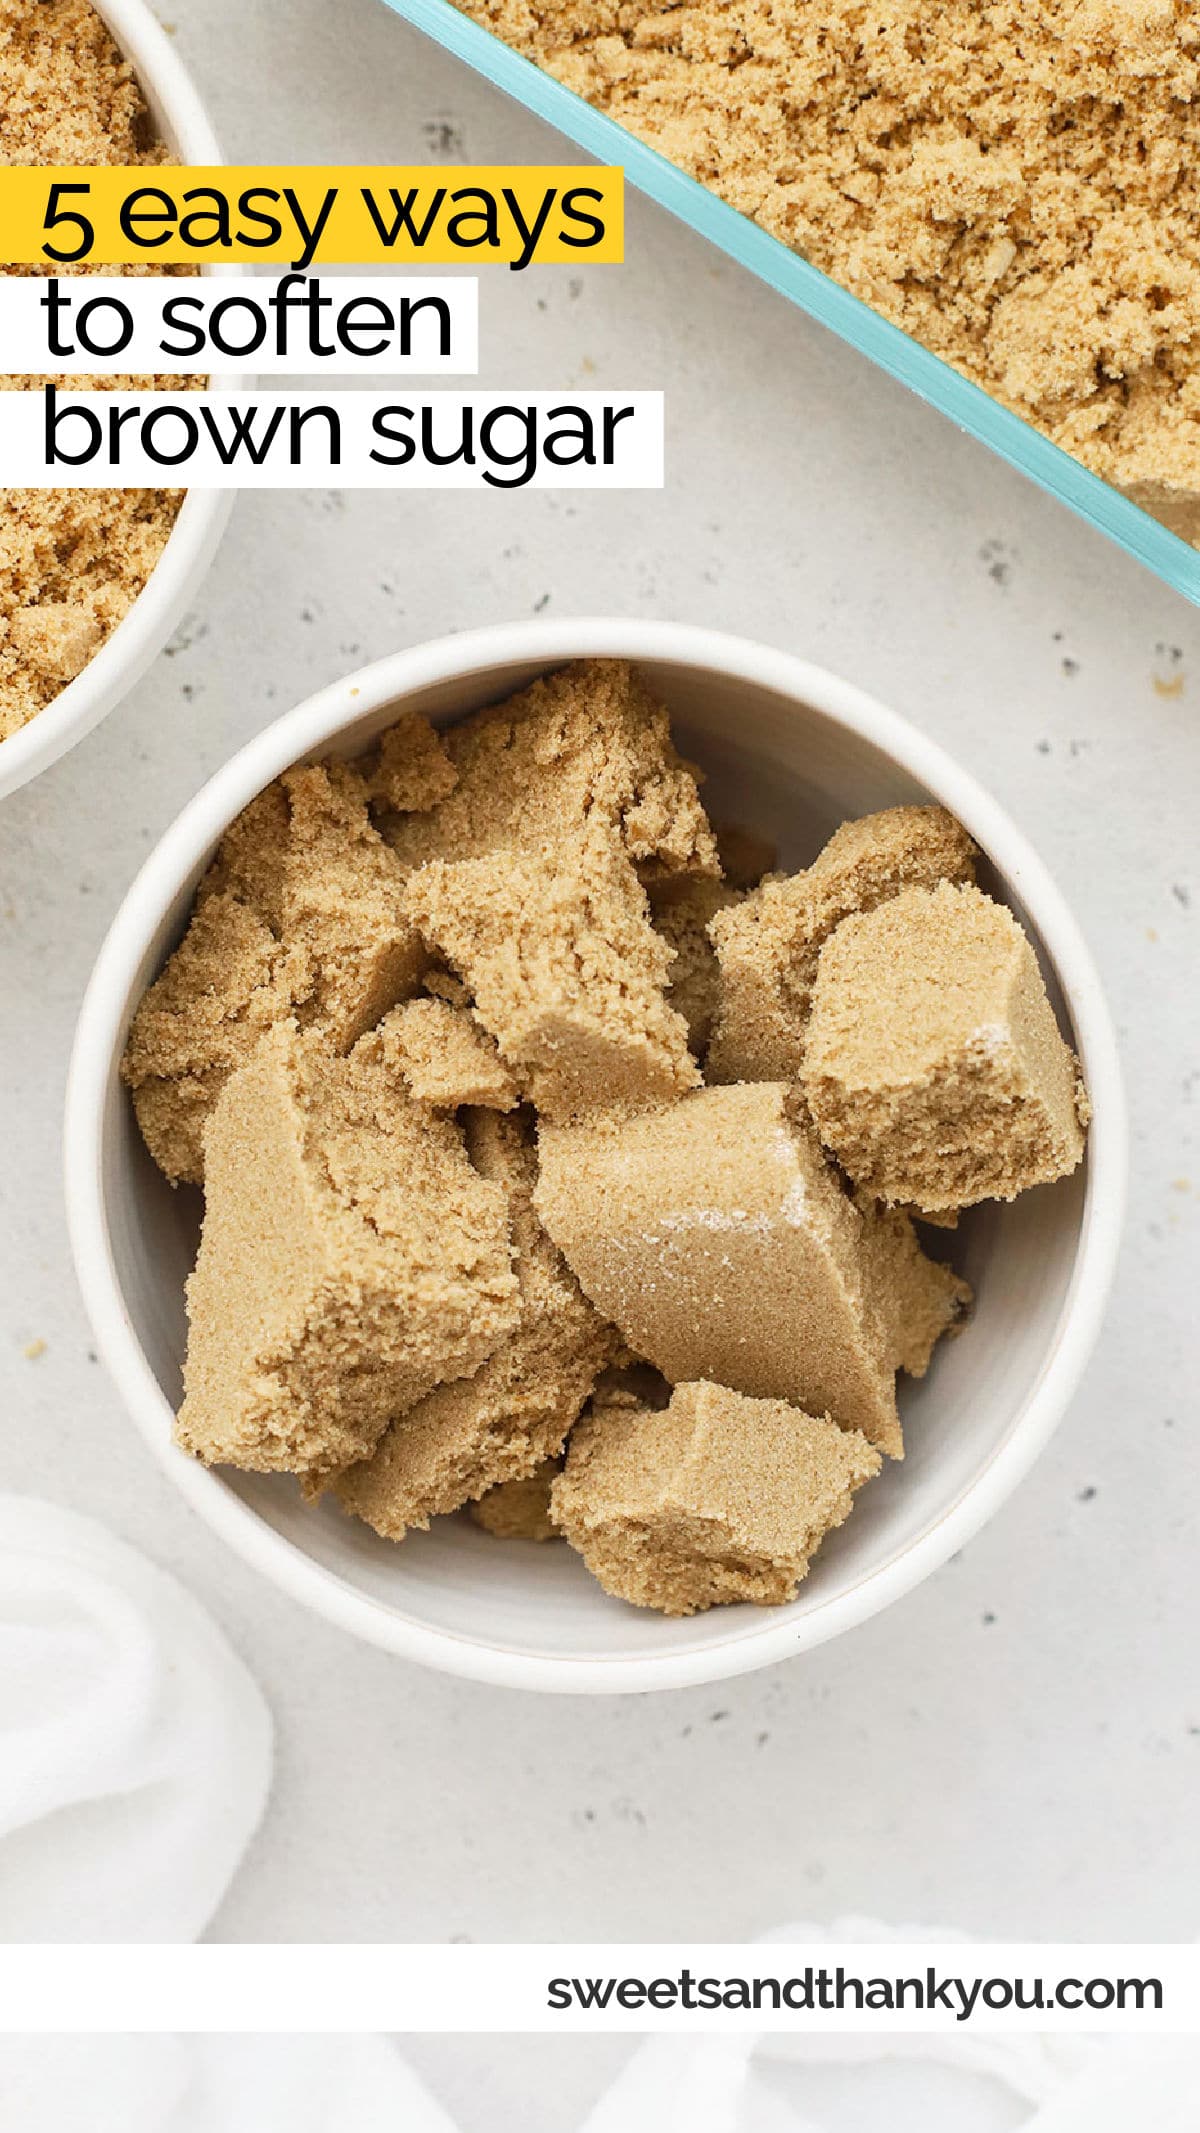 How Do You Soften Hard Brown Sugar? We've got 5 of the BEST ways to soften brown sugar for baking + how to keep it soft (#3 is my favorite!) We've got all the tips and tricks for softening brown sugar!  We'll show you how to soften brown sugar in the microwave or oven, how to soften it with a piece of bread (really!), and how to keep brown sugar soft. 